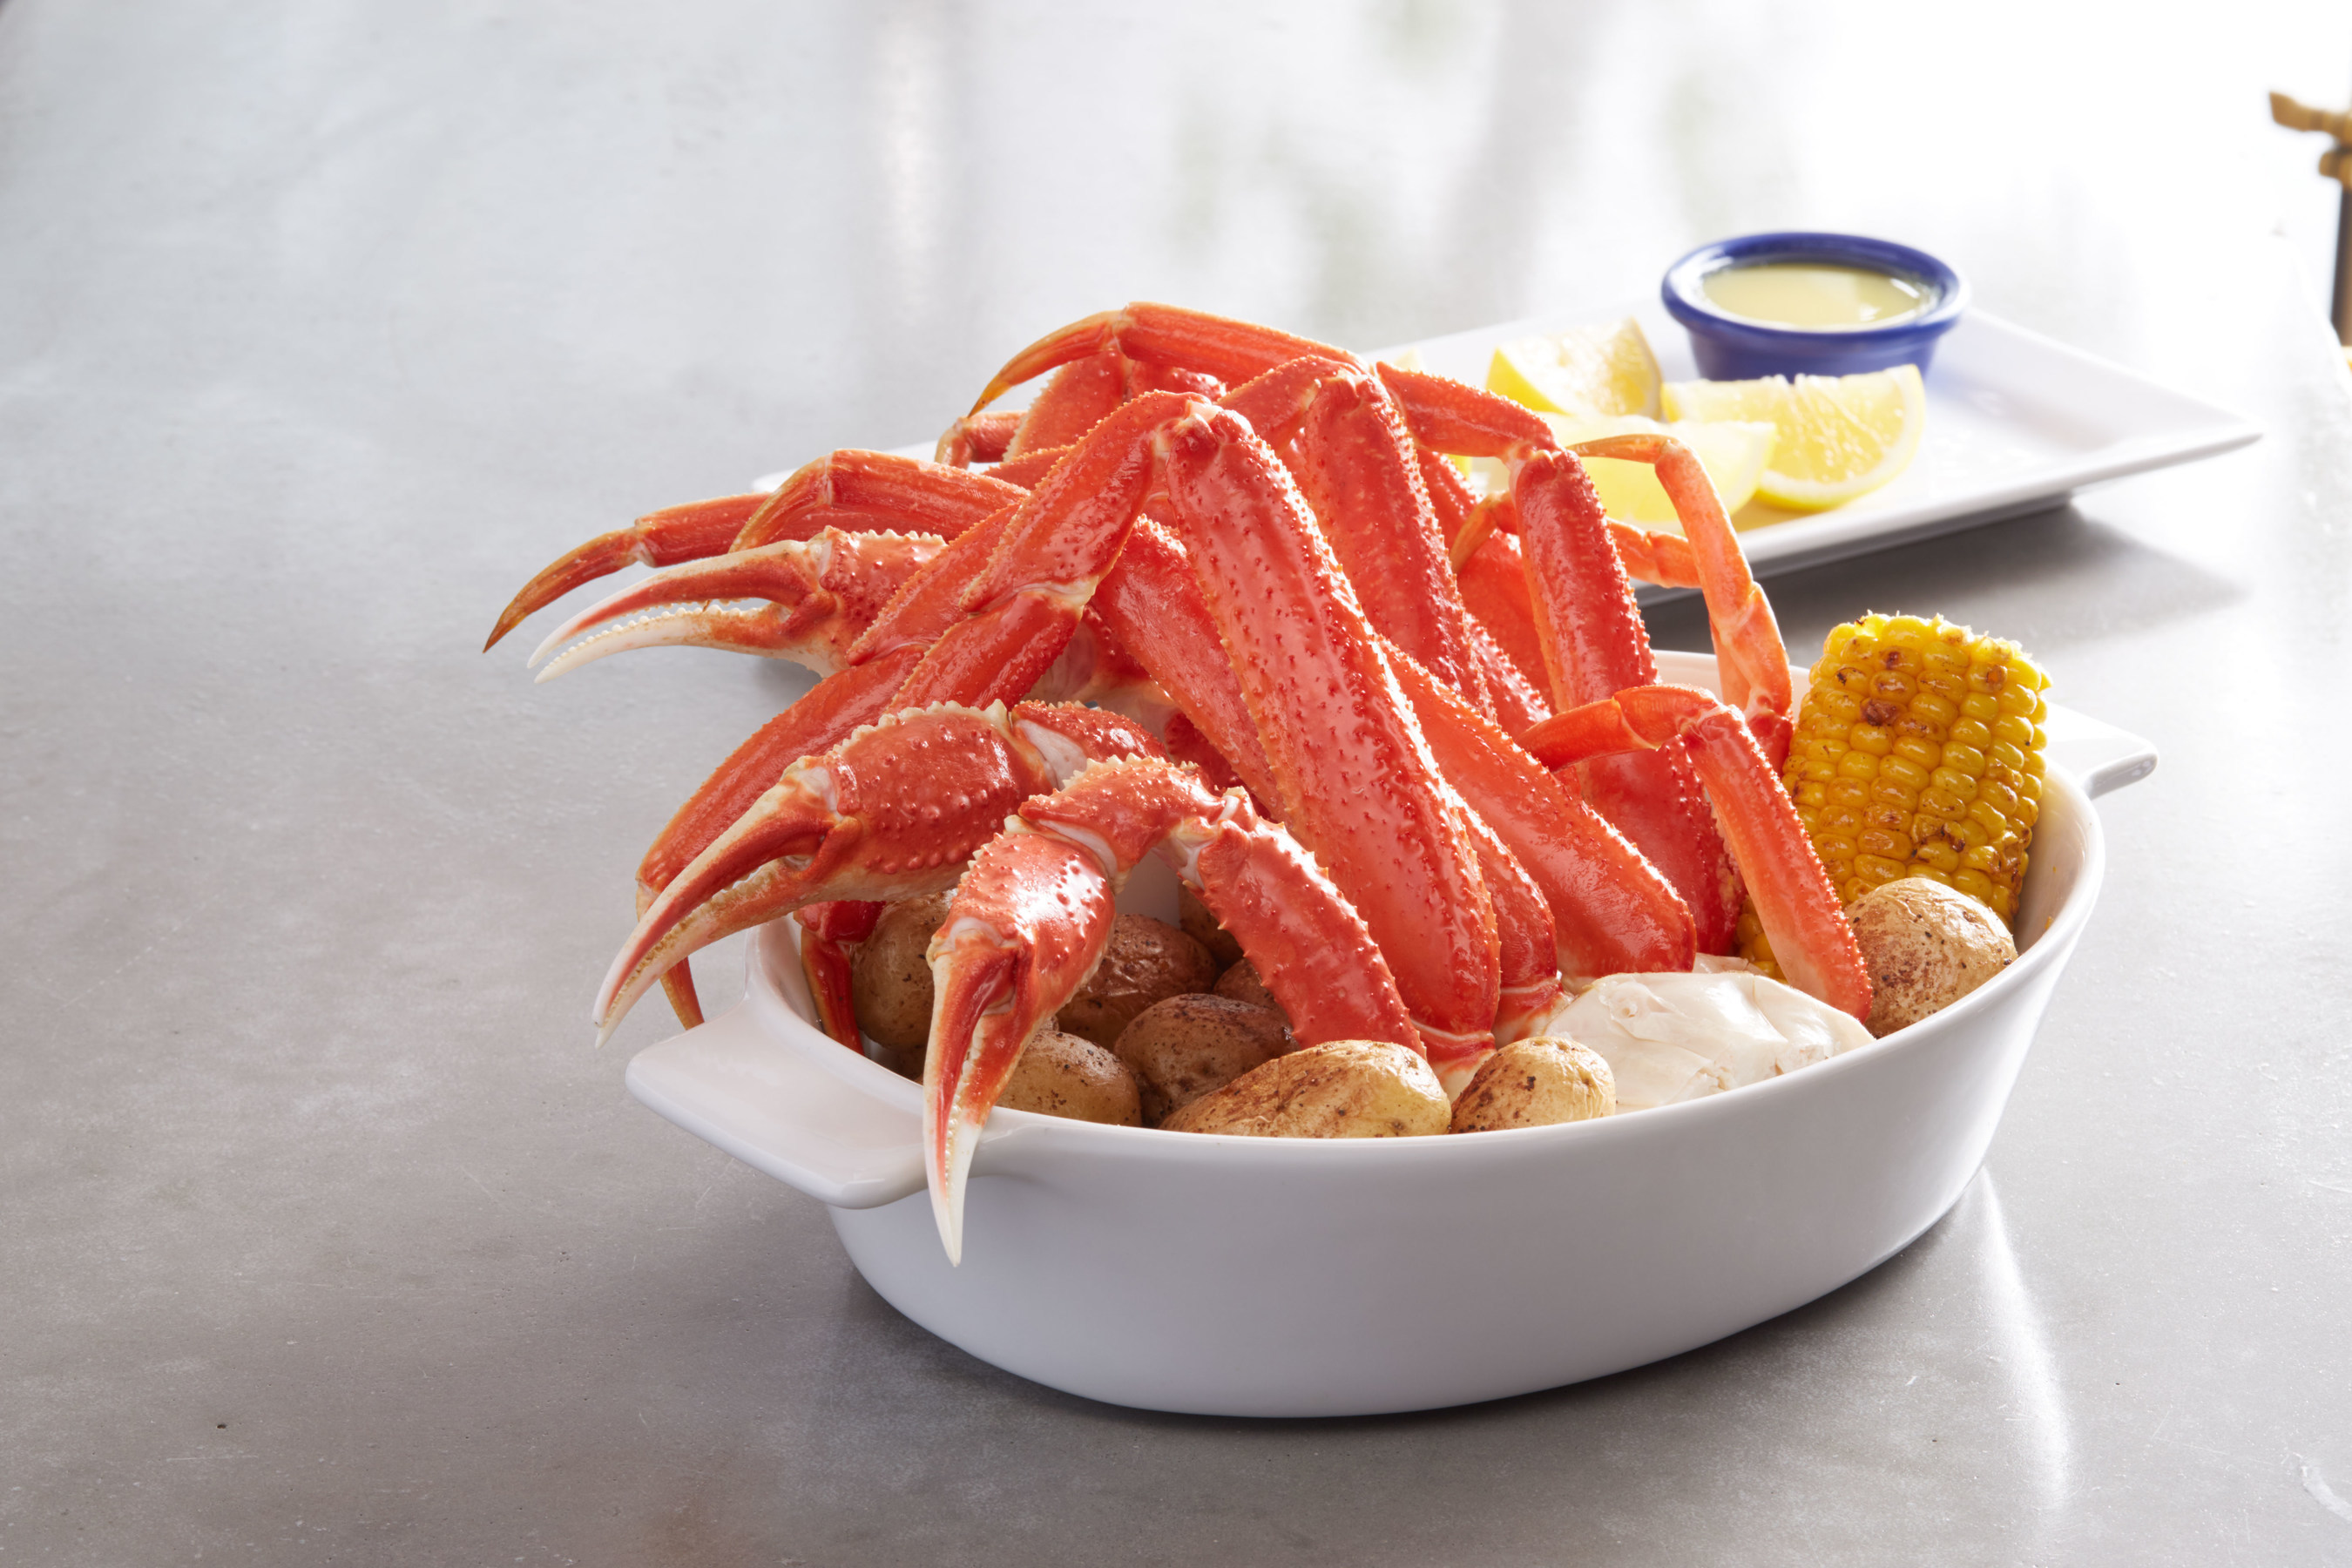 During Crabfest, guests can enjoy Red Lobster's NEW! Wild-Caught Crab Legs Dinner with the choice of a generous portion of three selections of wild-caught crab legs - Alaska Bairdi crab, North American snow crab or king crab.